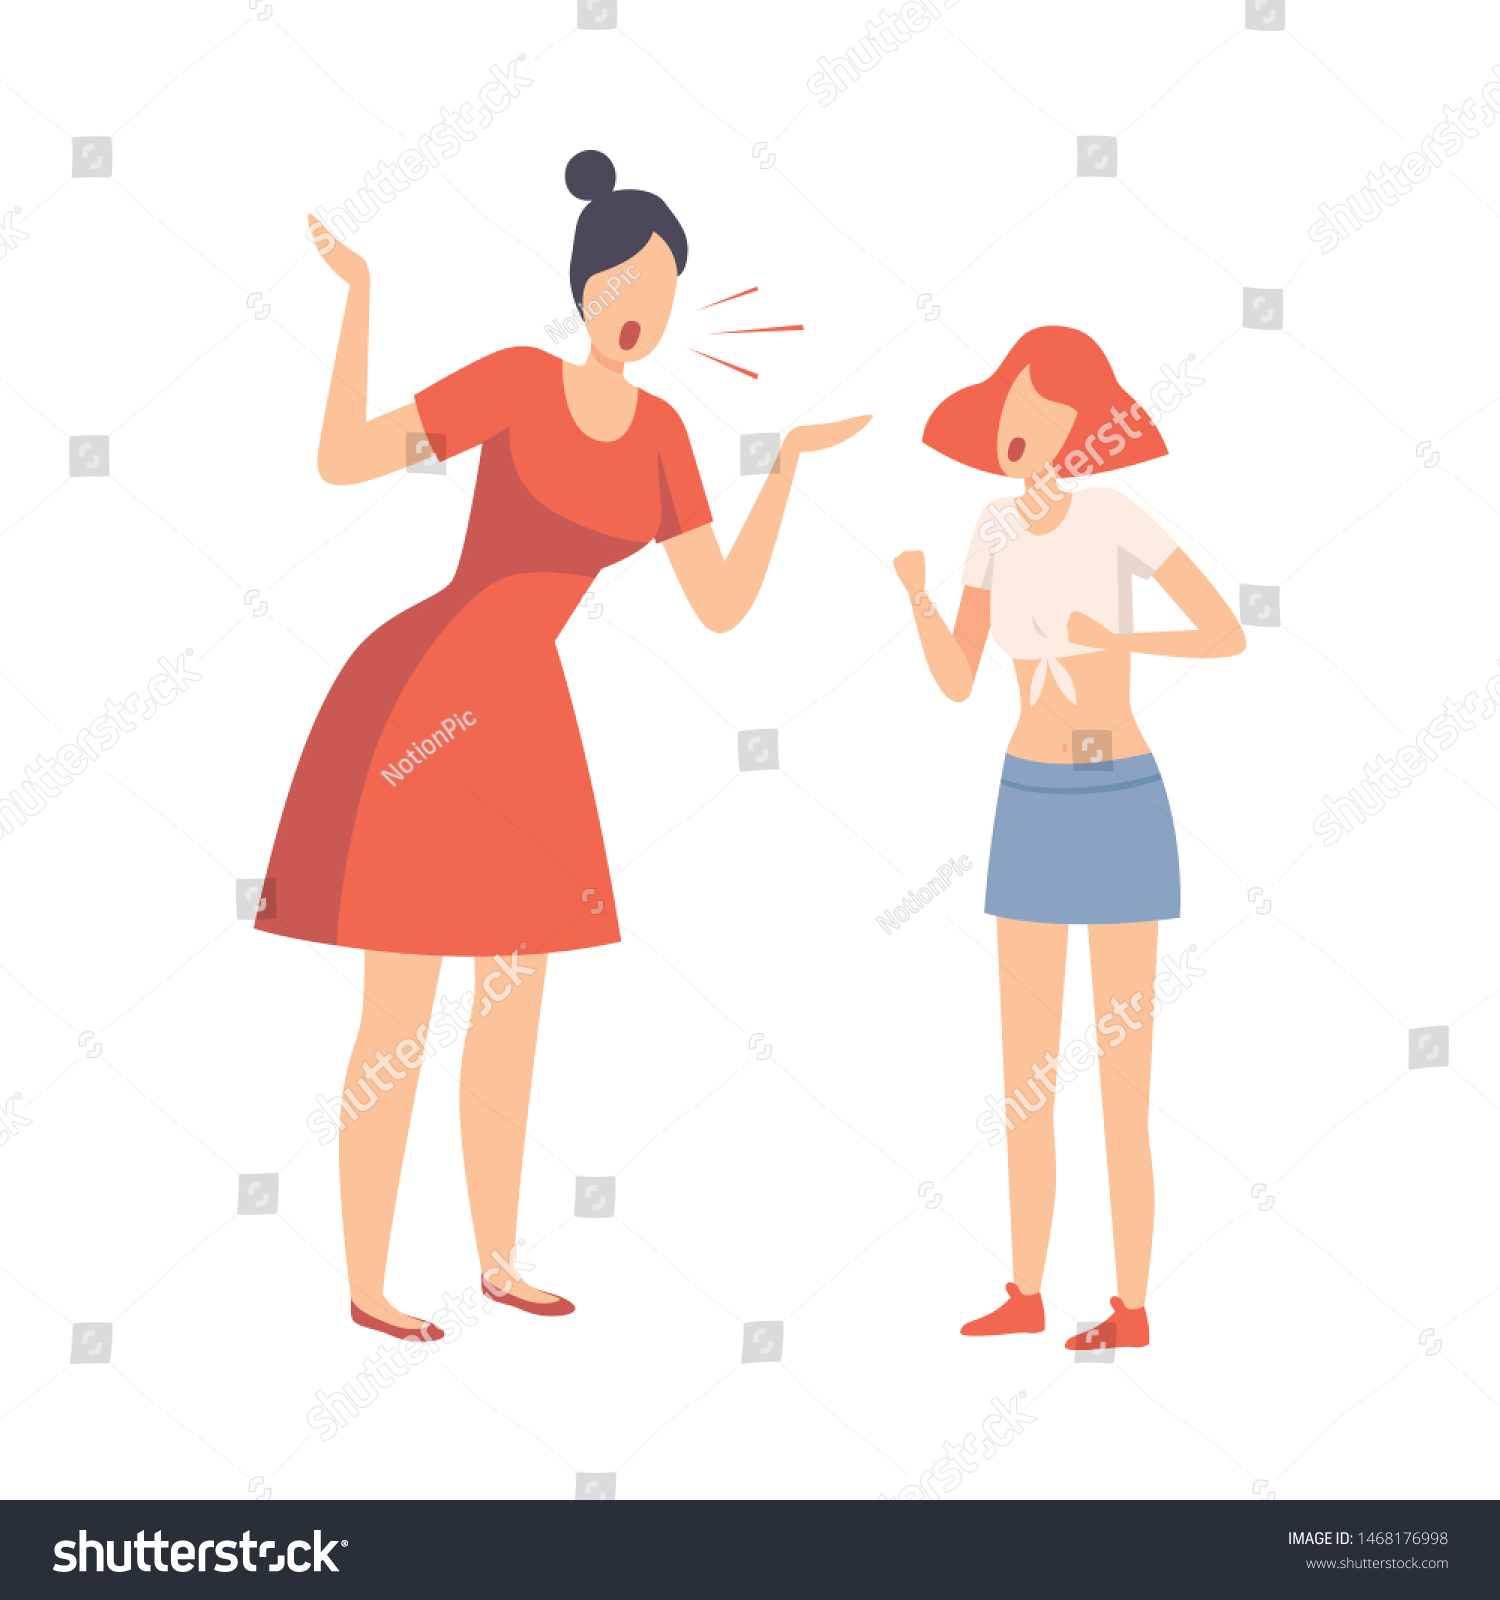 Mother Scolding Her Teenager Daughter Conflict Stock Vector Royalty Free 1468176998 Shutterstock 